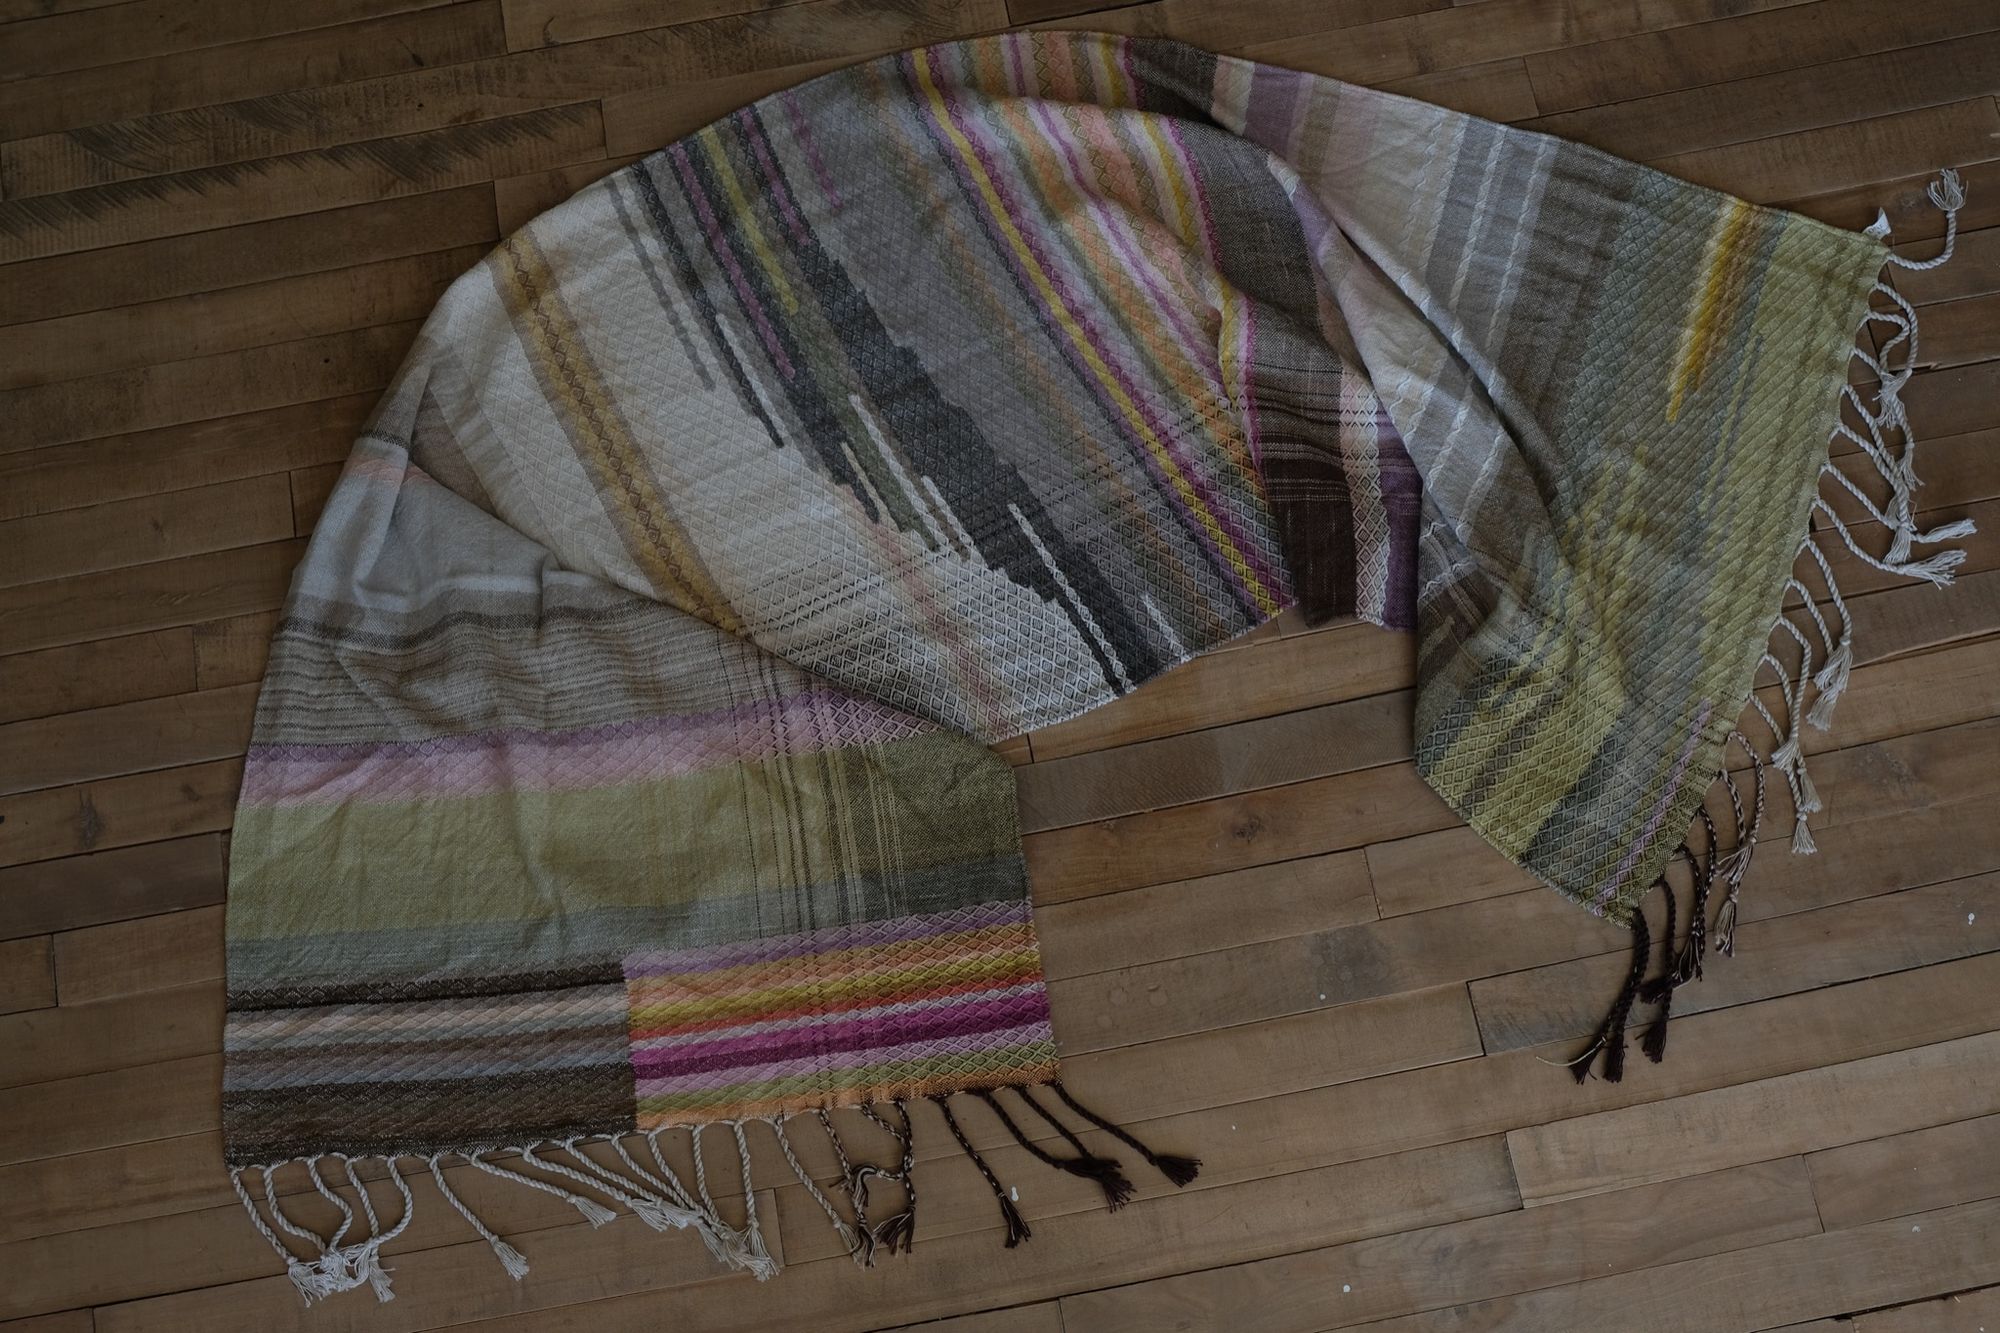 Handwoven fabric in a naturally dyed rainbow of grey, browns, greens, pinks, purples, yellow and orange lays on a wooden floor